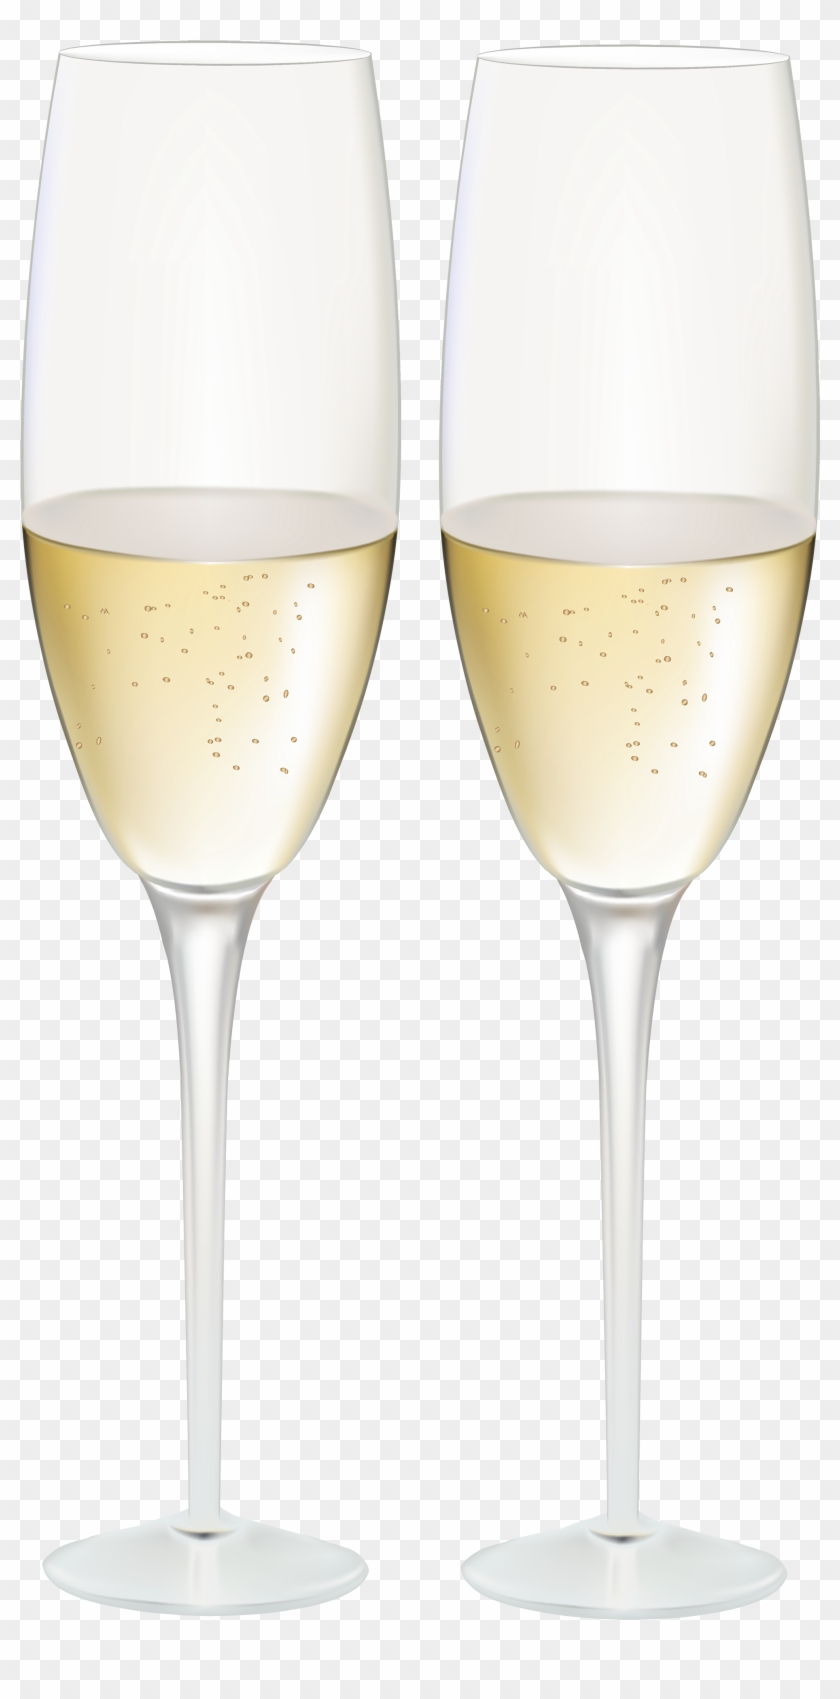 Champagne Glasses Png Clipart - Champagne Glasses Png #206994